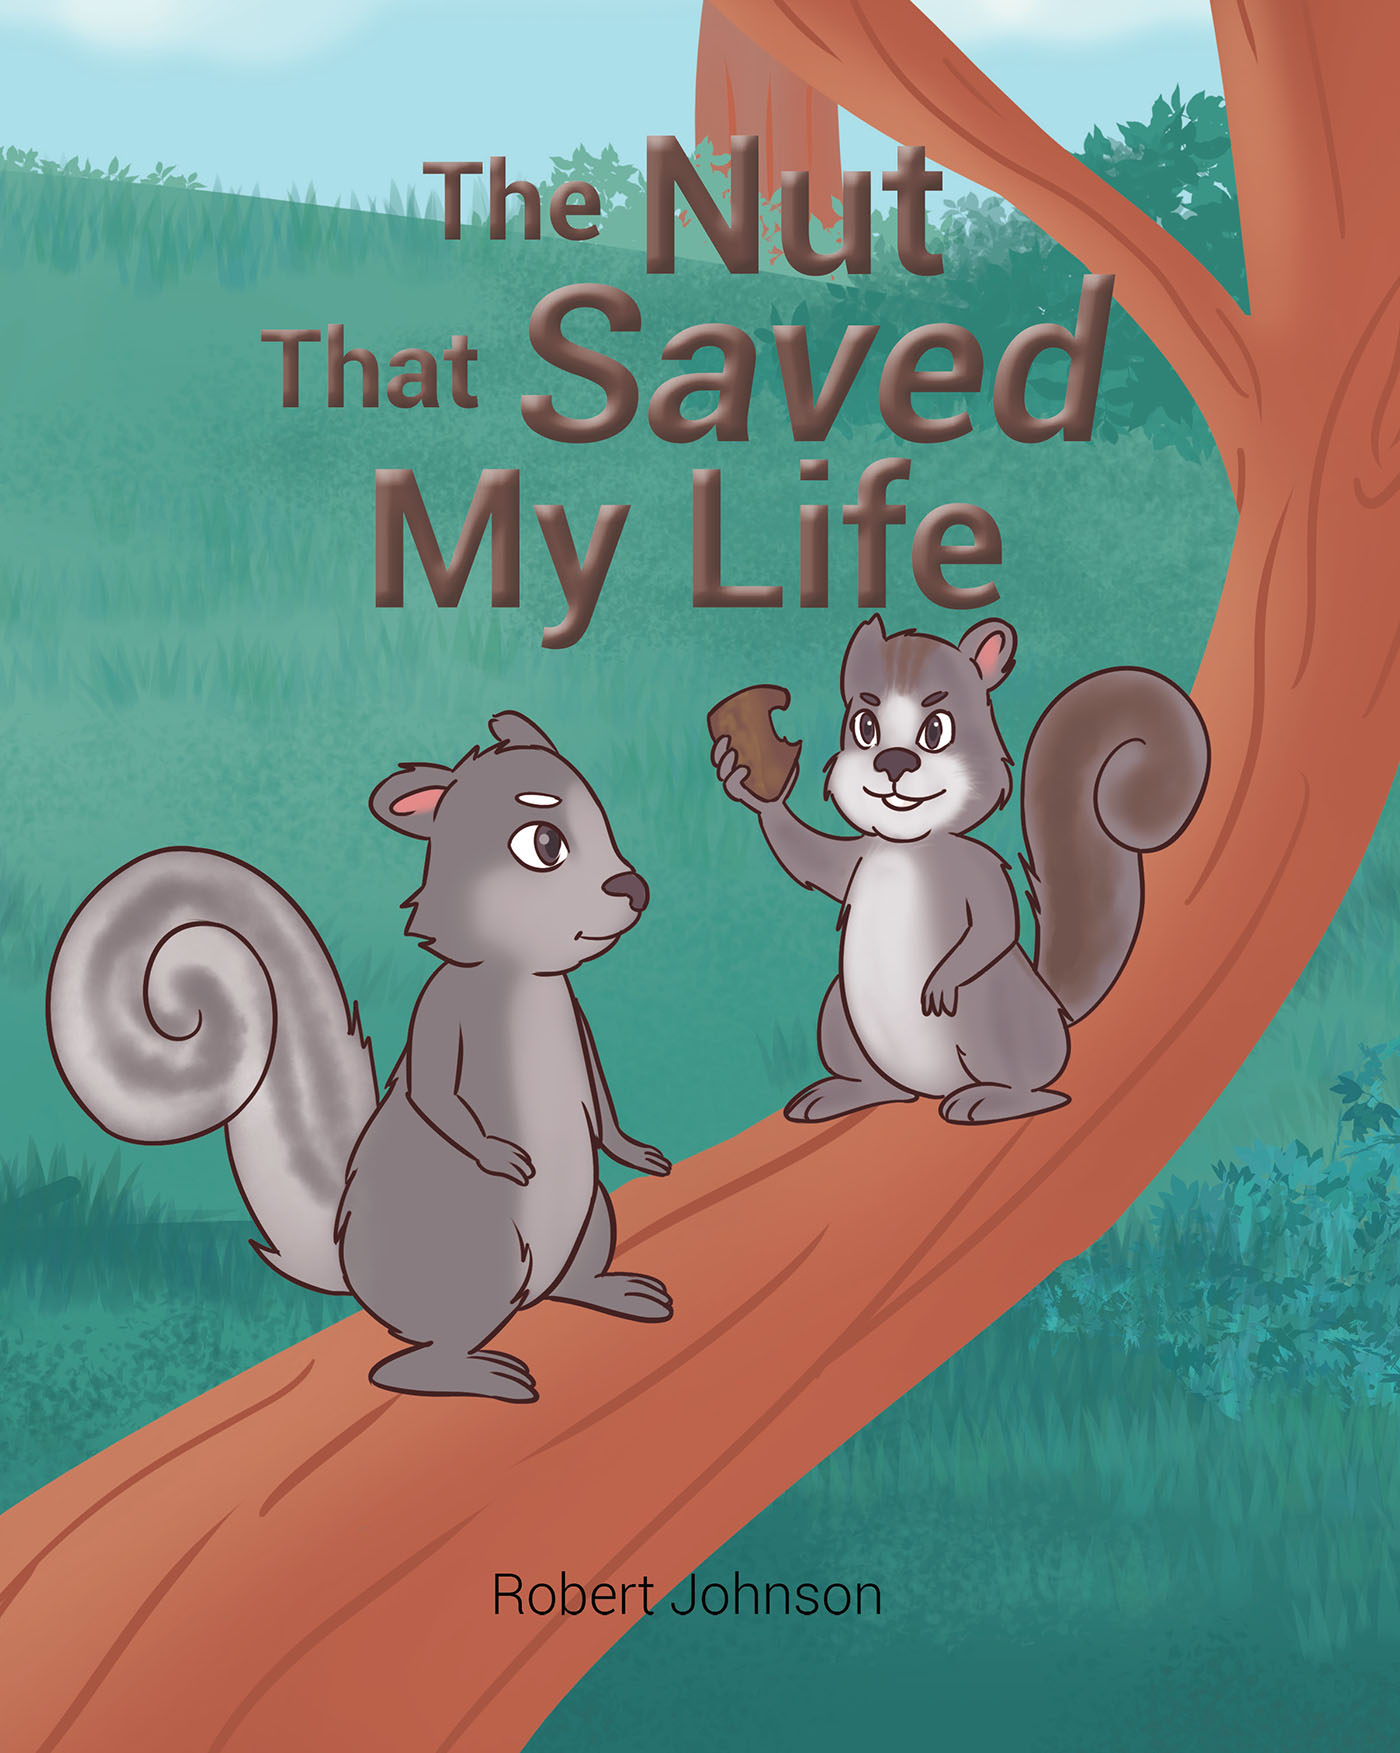 Robert Johnson’s New Book, "The Nut That Saved My Life," Centers Around Two Squirrels Who Bite Off More Than They Can Chew After Setting Off to Find the Largest Acorn